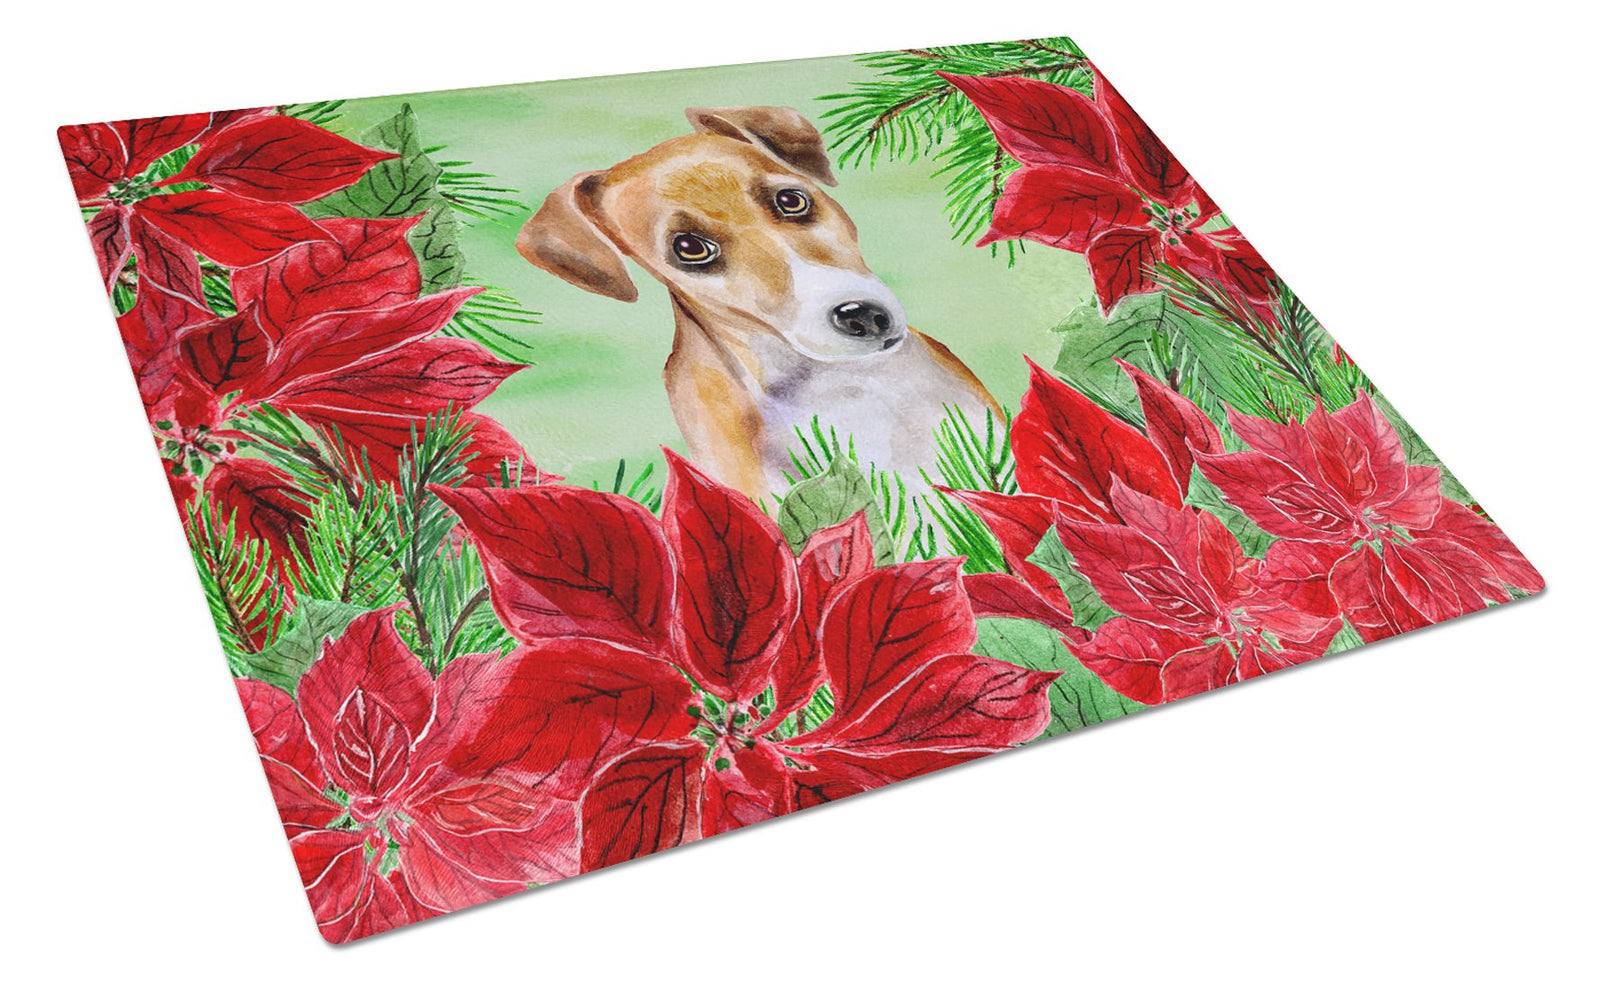 Jack Russell Terrier #2 Poinsettas Glass Cutting Board Large CK1360LCB by Caroline's Treasures